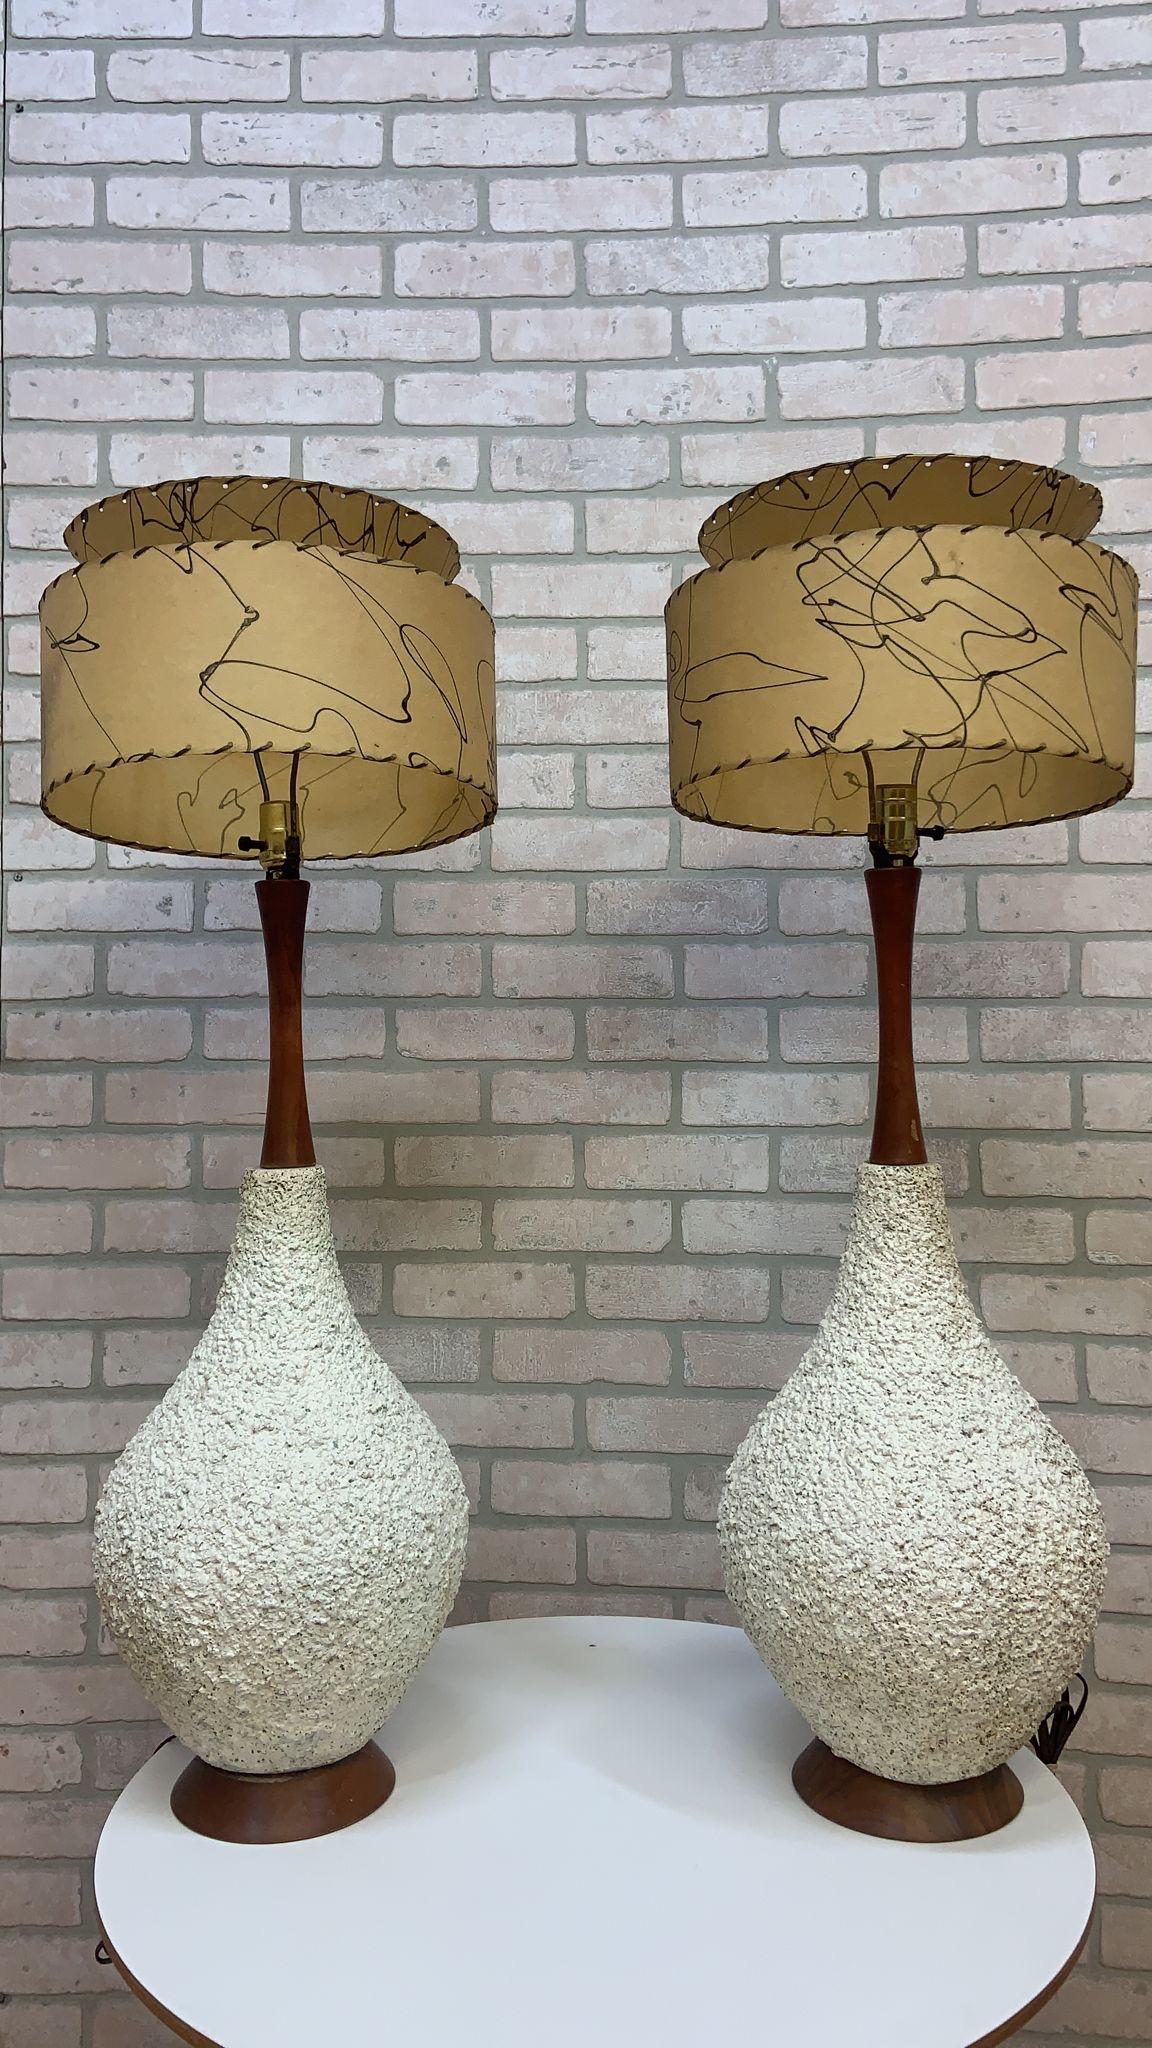 Mid Century-Modern Large Teak Popcorn Base Table Lamps - Pair

A very cool pair of large table lamps from the 1950s. They are constructed out of teak and plaster to create the popcorn texture on the lamps.

Lamps have been tested and they are in